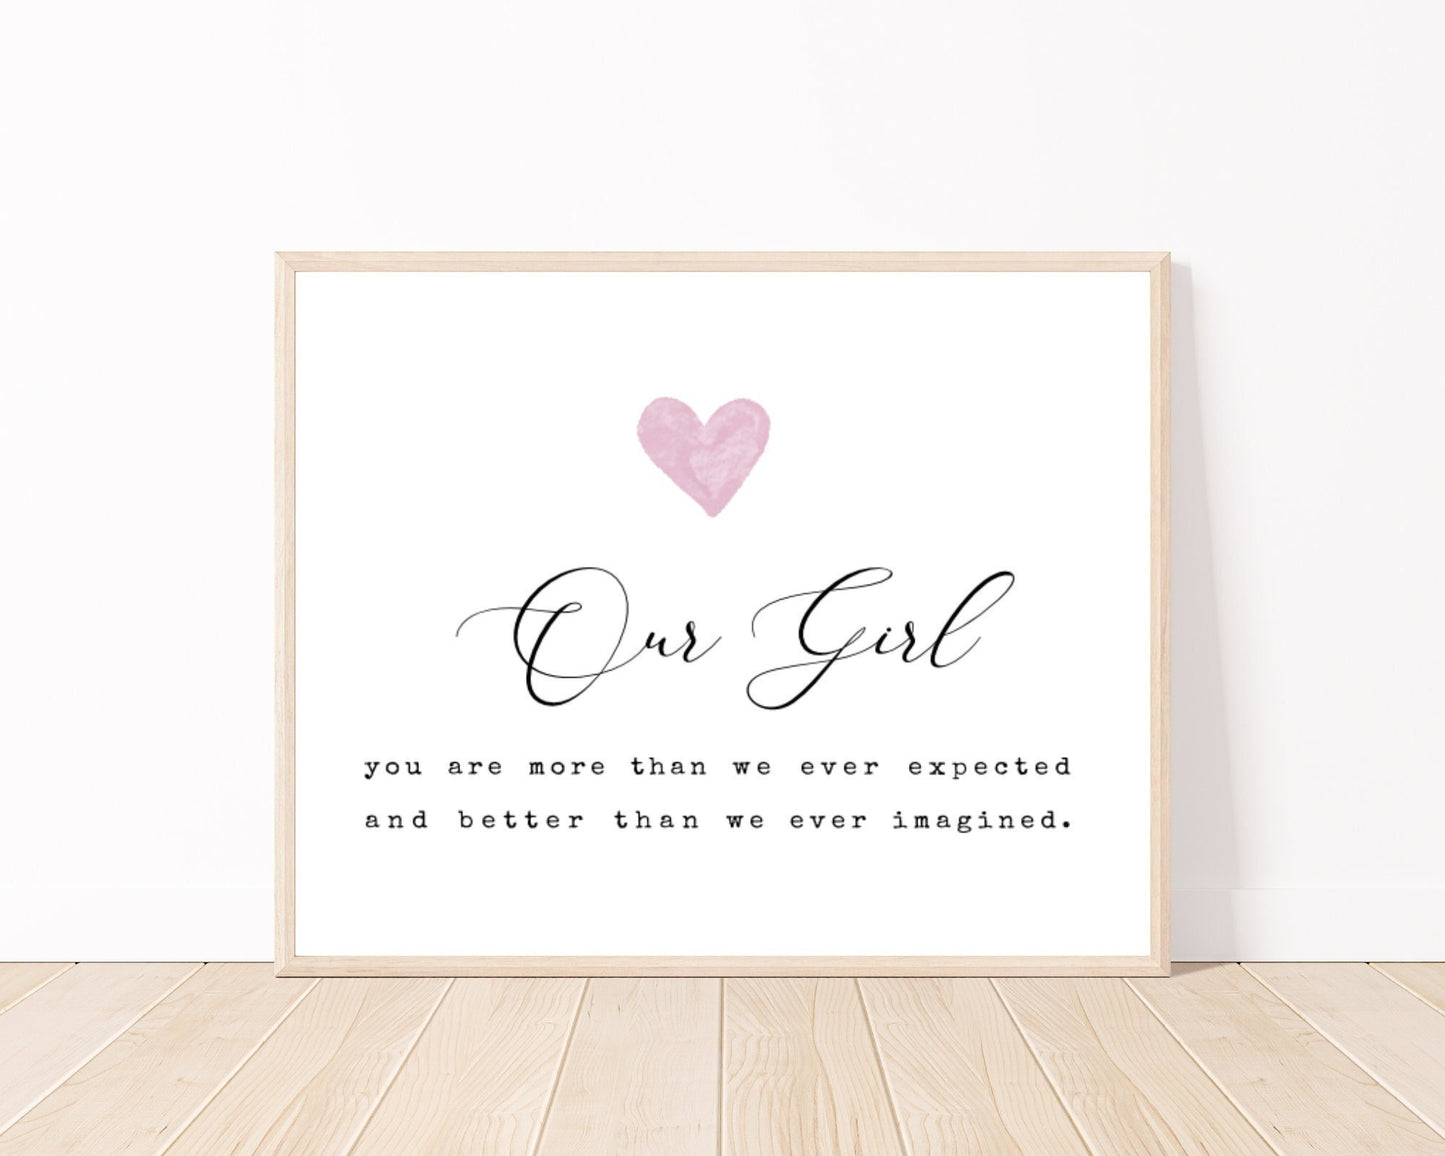 A little girl’s room digital print placed on a white wall and parquet flooring that has a pink heart at the top, and a piece of writing that says: “Our girl, you are more than we ever expected and better than we ever imagined.”